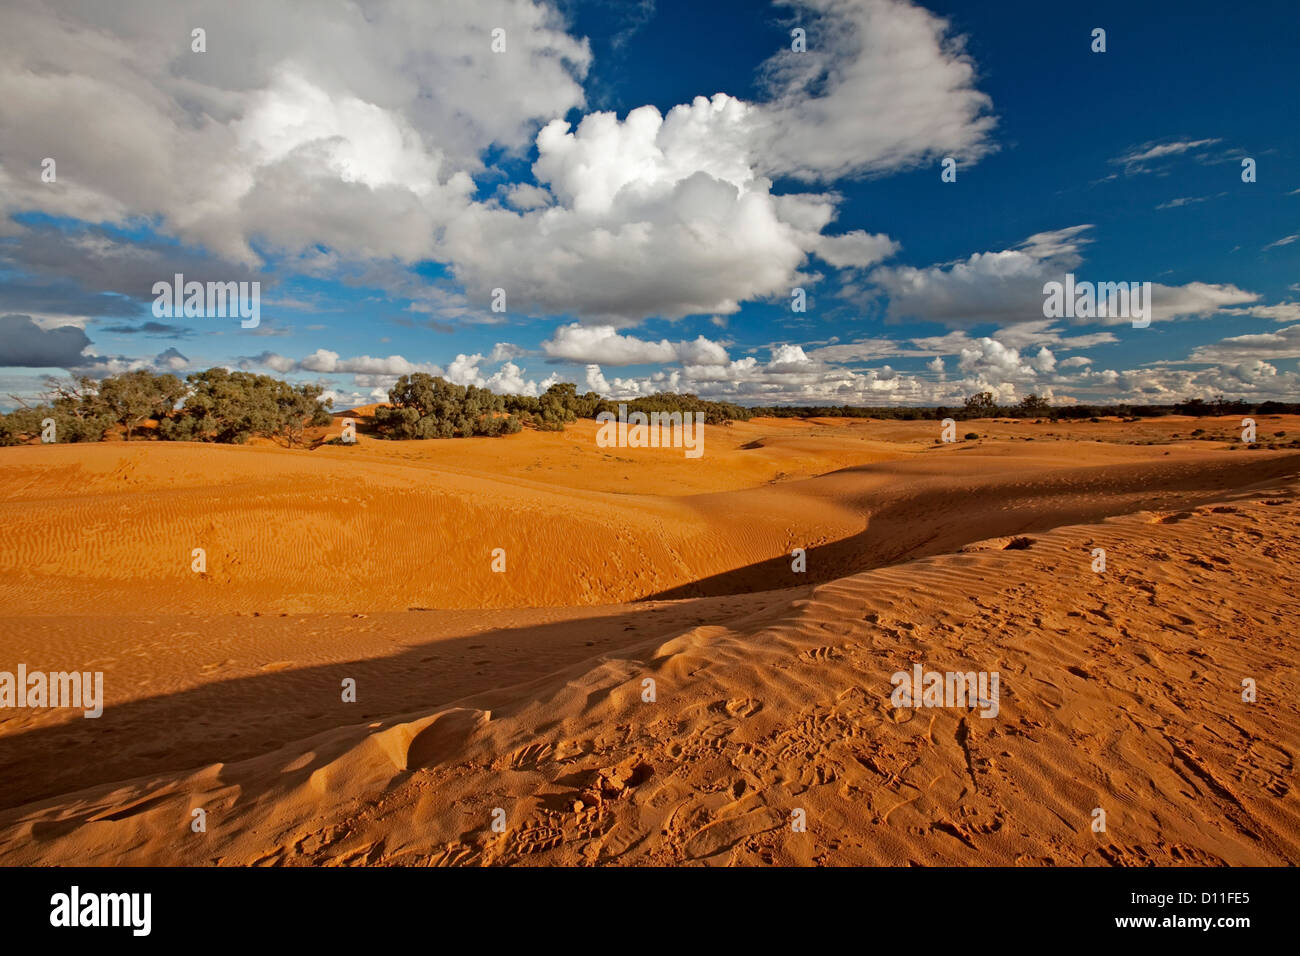 Desert landscape with Perry sandhills / sand dunes under a blue sky at Wentworth, NSW in the Australian outback Stock Photo